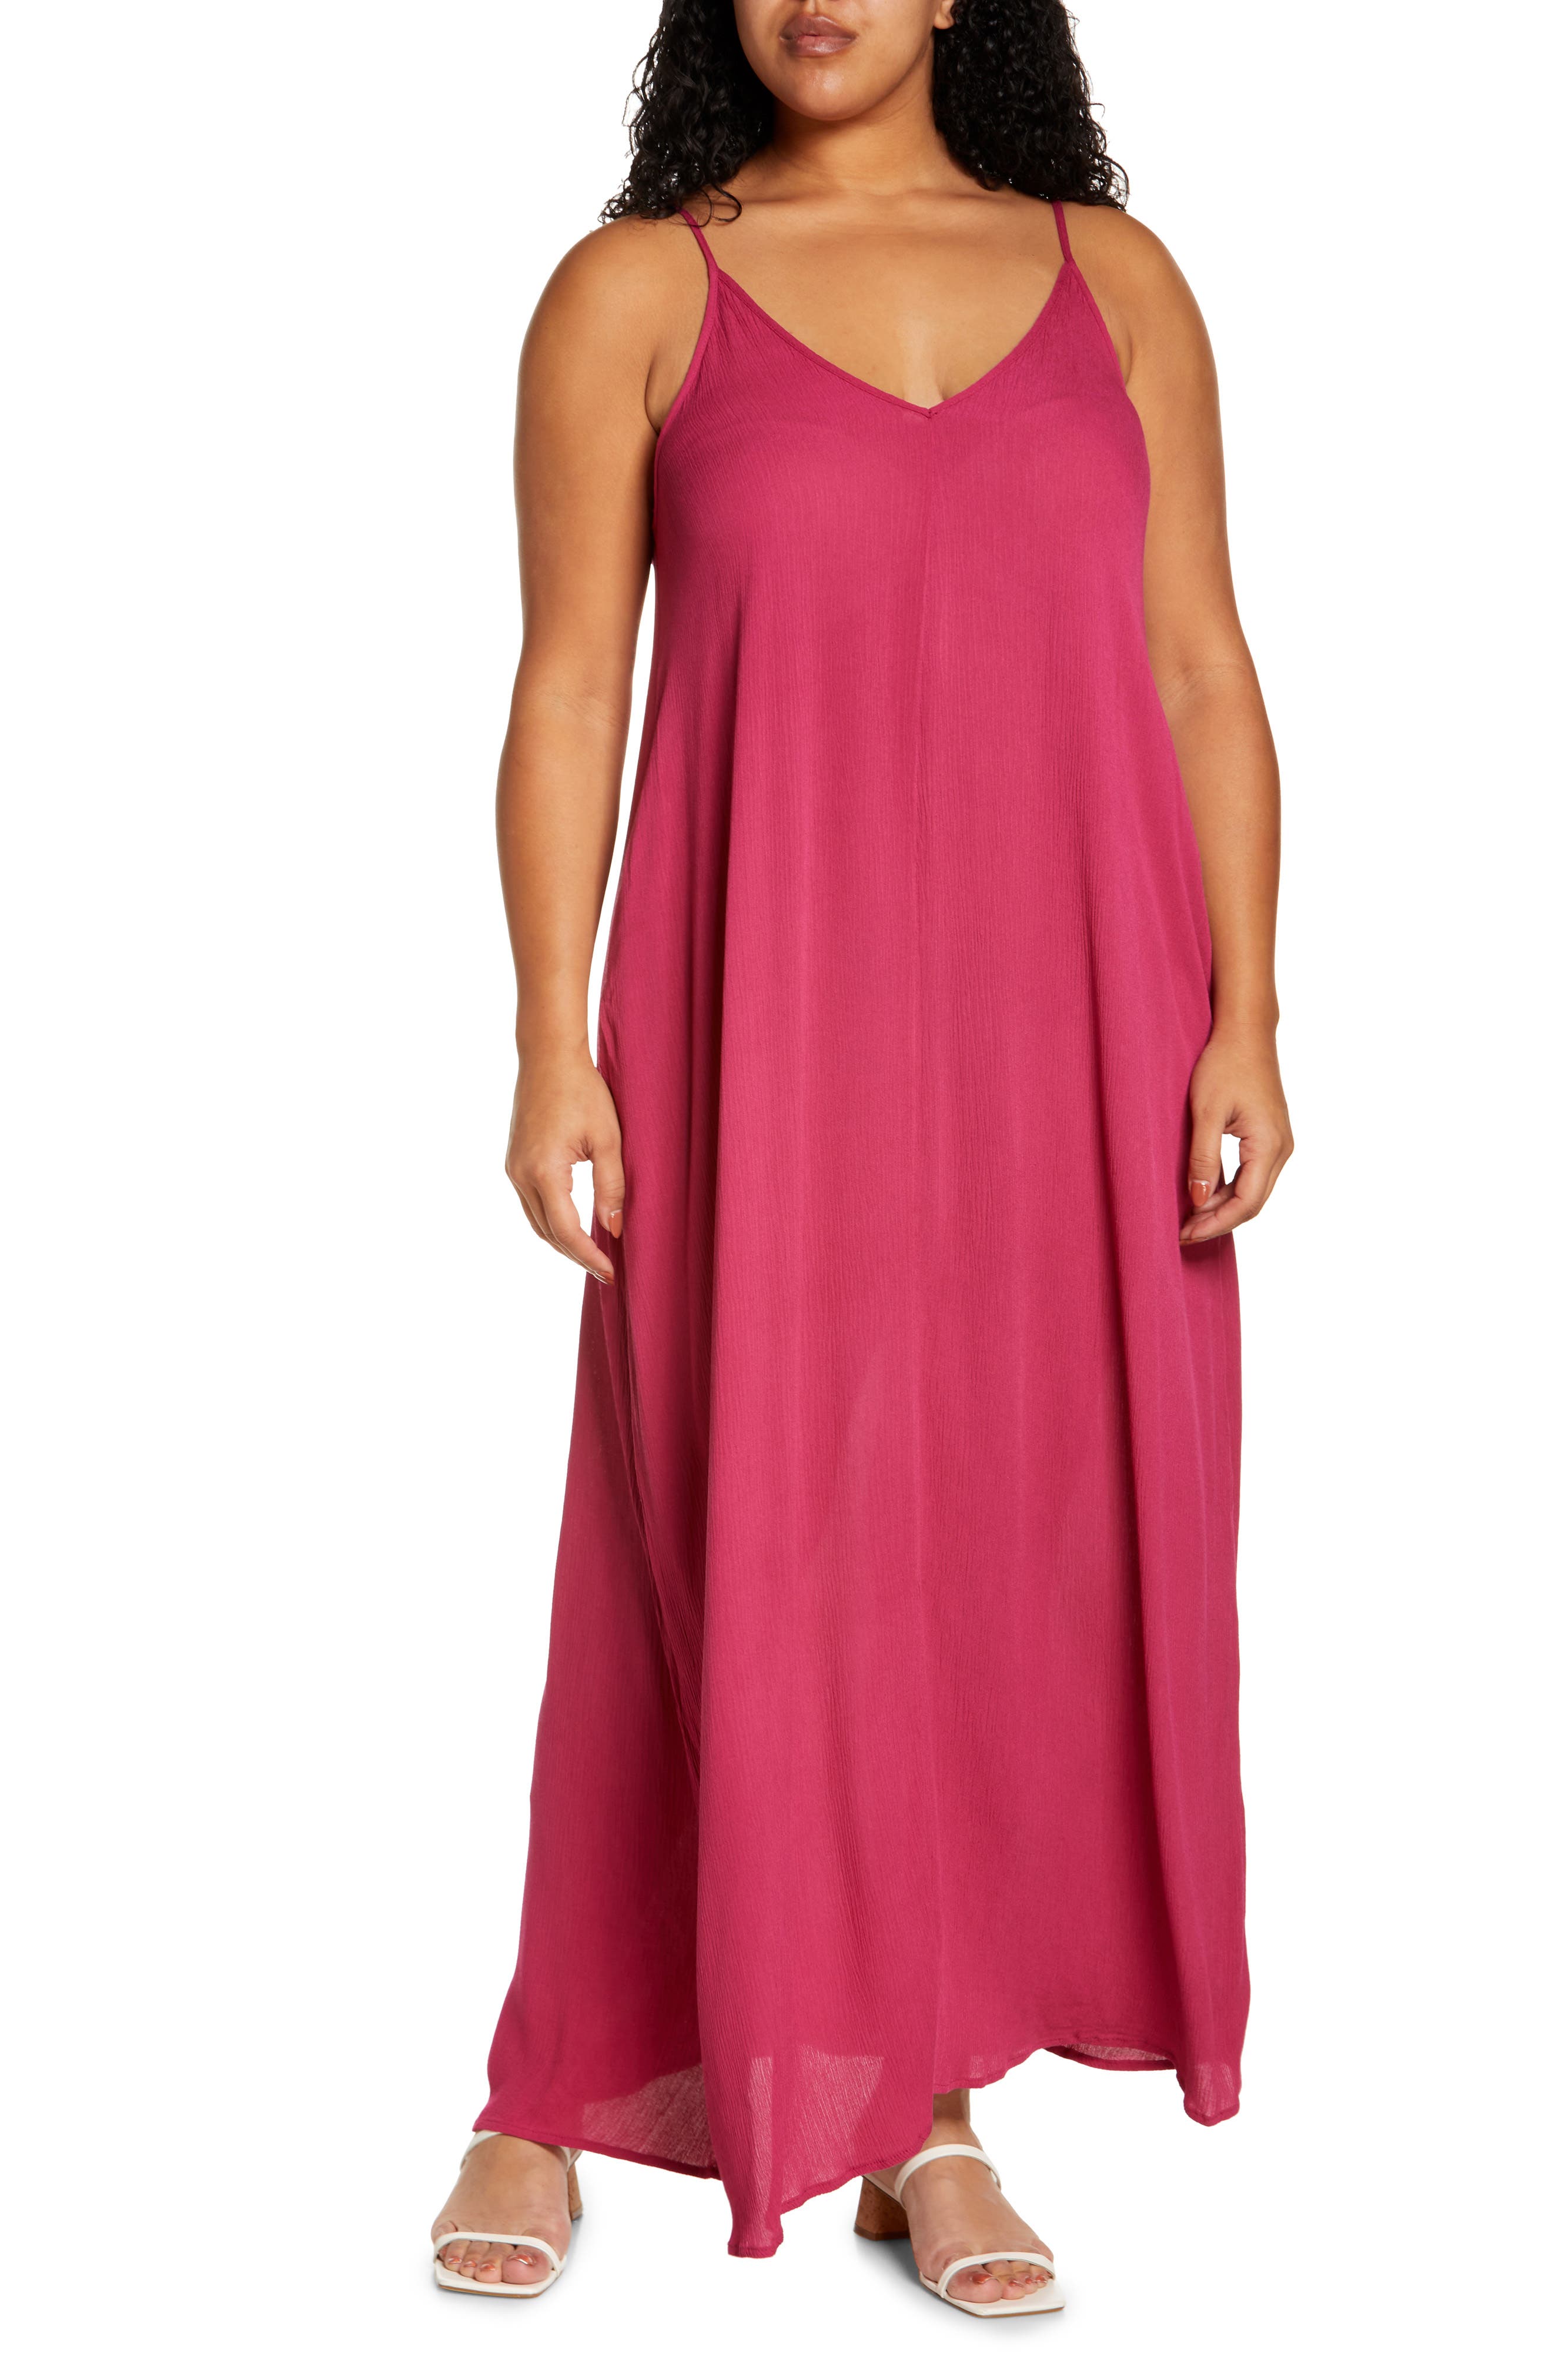 Pink Plus Size Dresses for Women ...